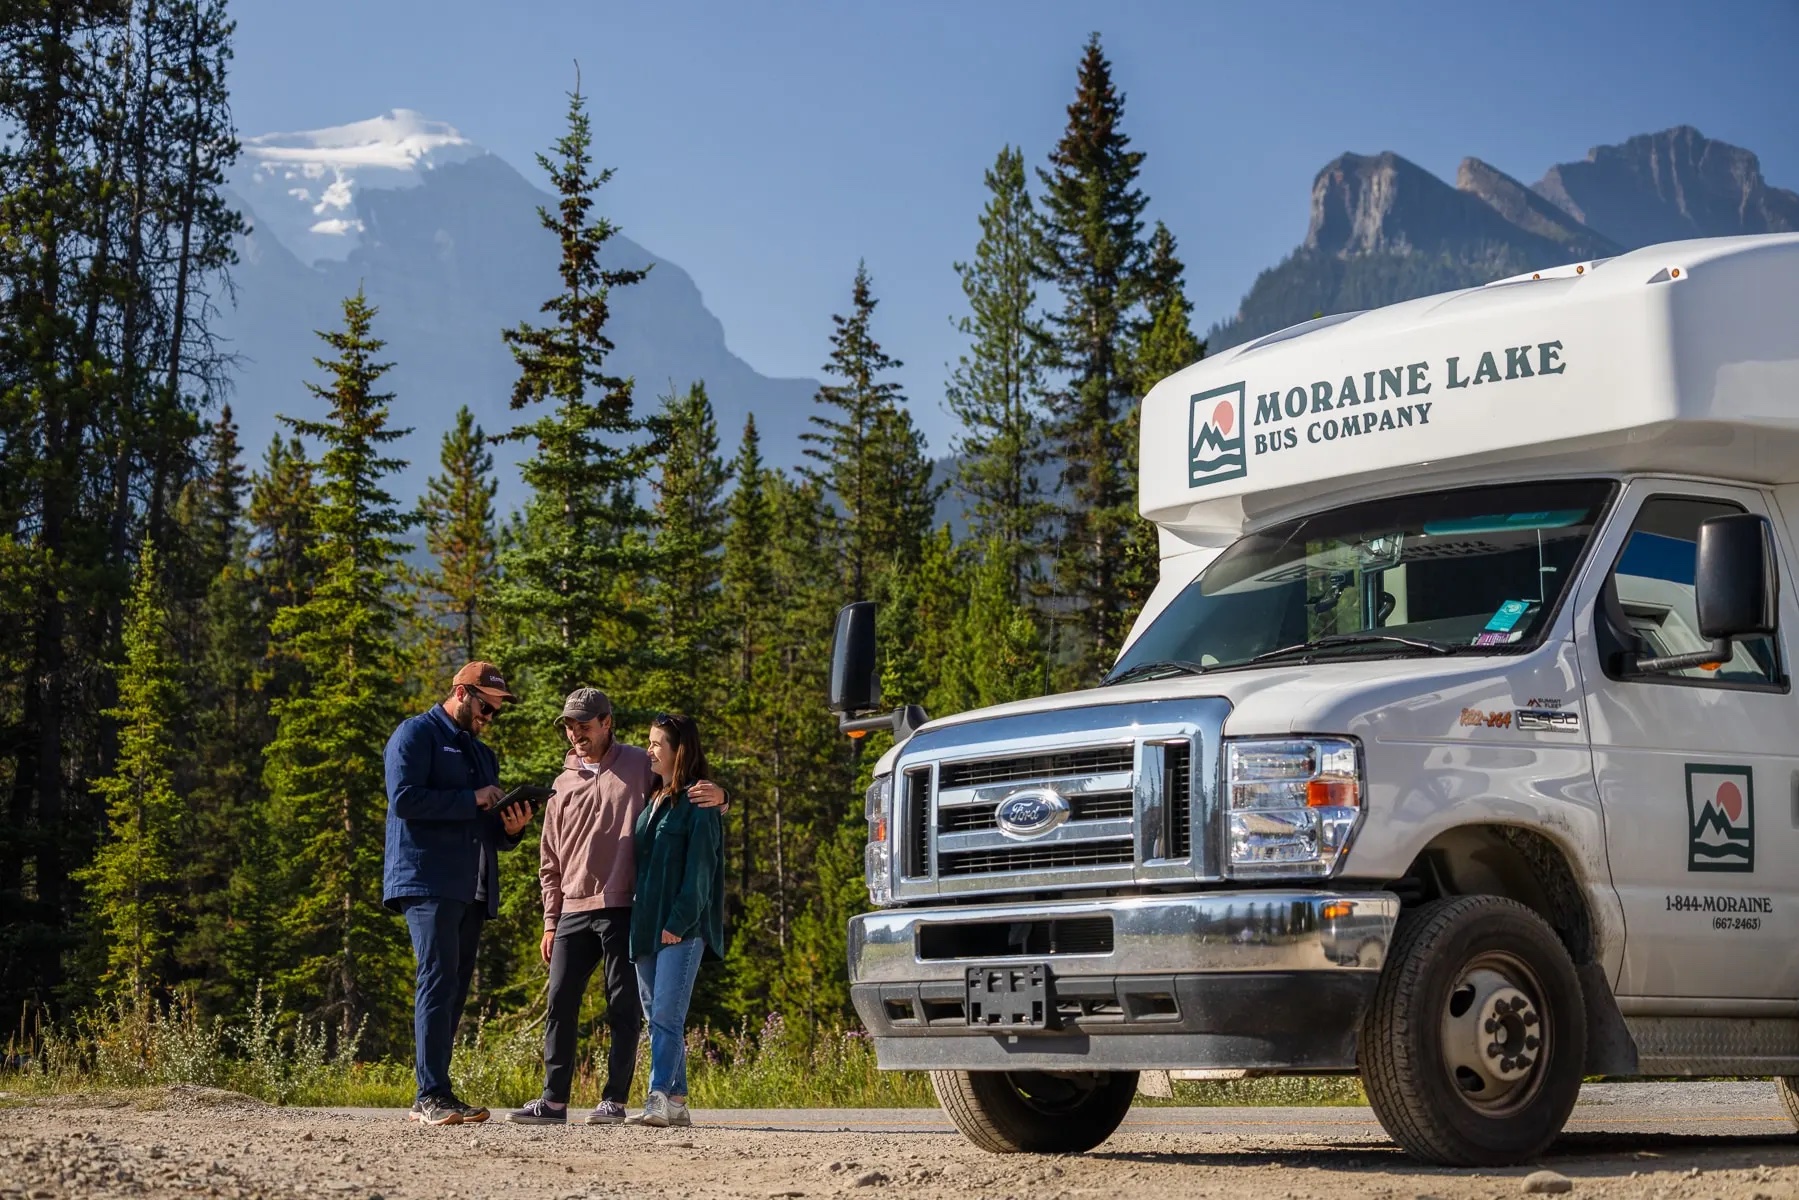 We Highly Recommend using the Moraine Lake Bus Company 